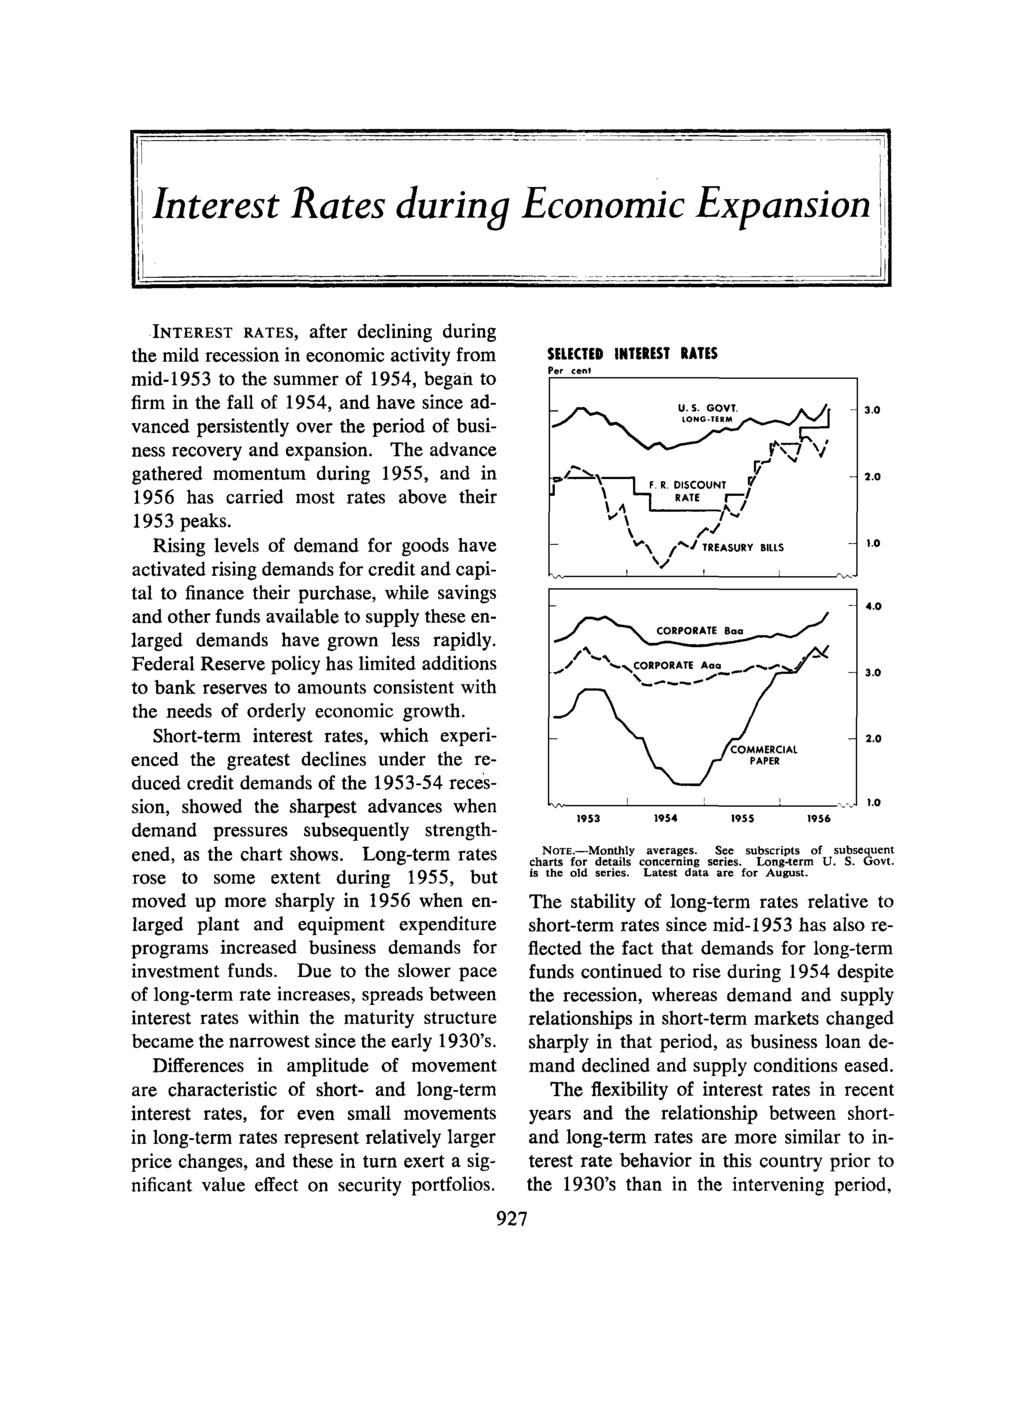 Interest Rates during Economic Expansion INTEREST RATES, after declining during the mild recession in economic activity from mid-1953 to the summer of 1954, began to firm in the fall of 1954, and